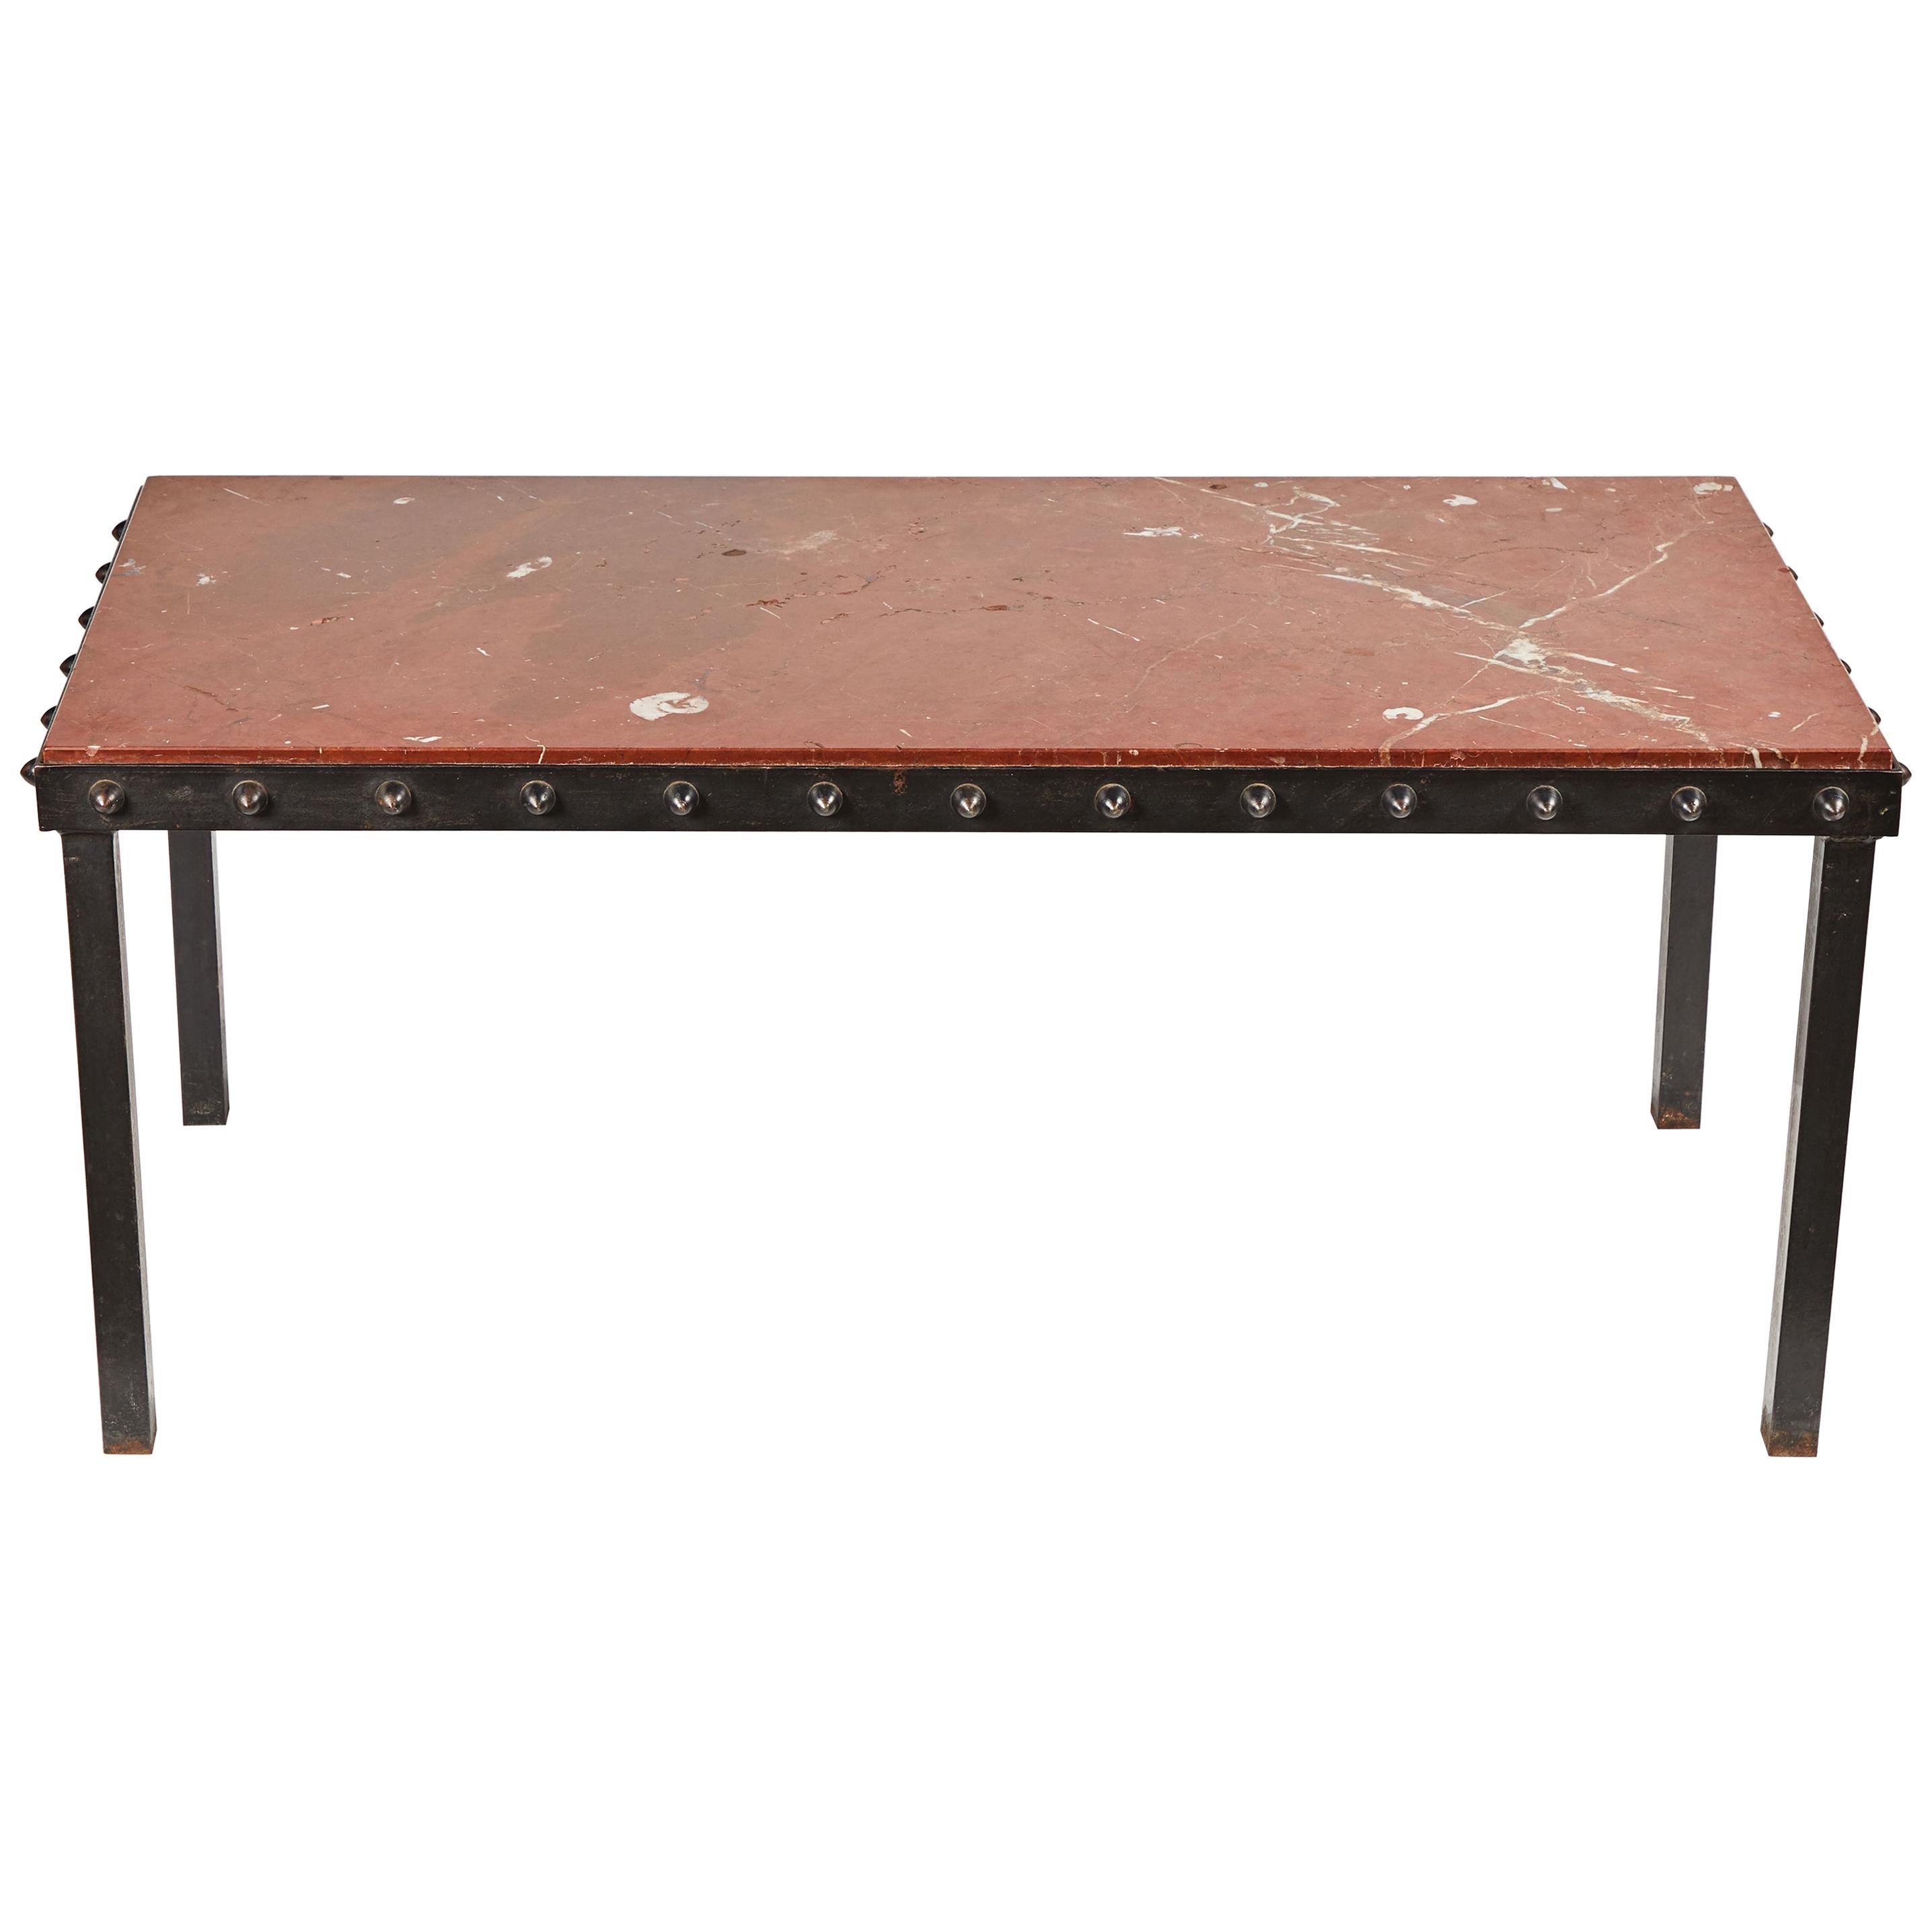 1940s French Marble Top Coffee Table with Iron Legs and Studded Trim